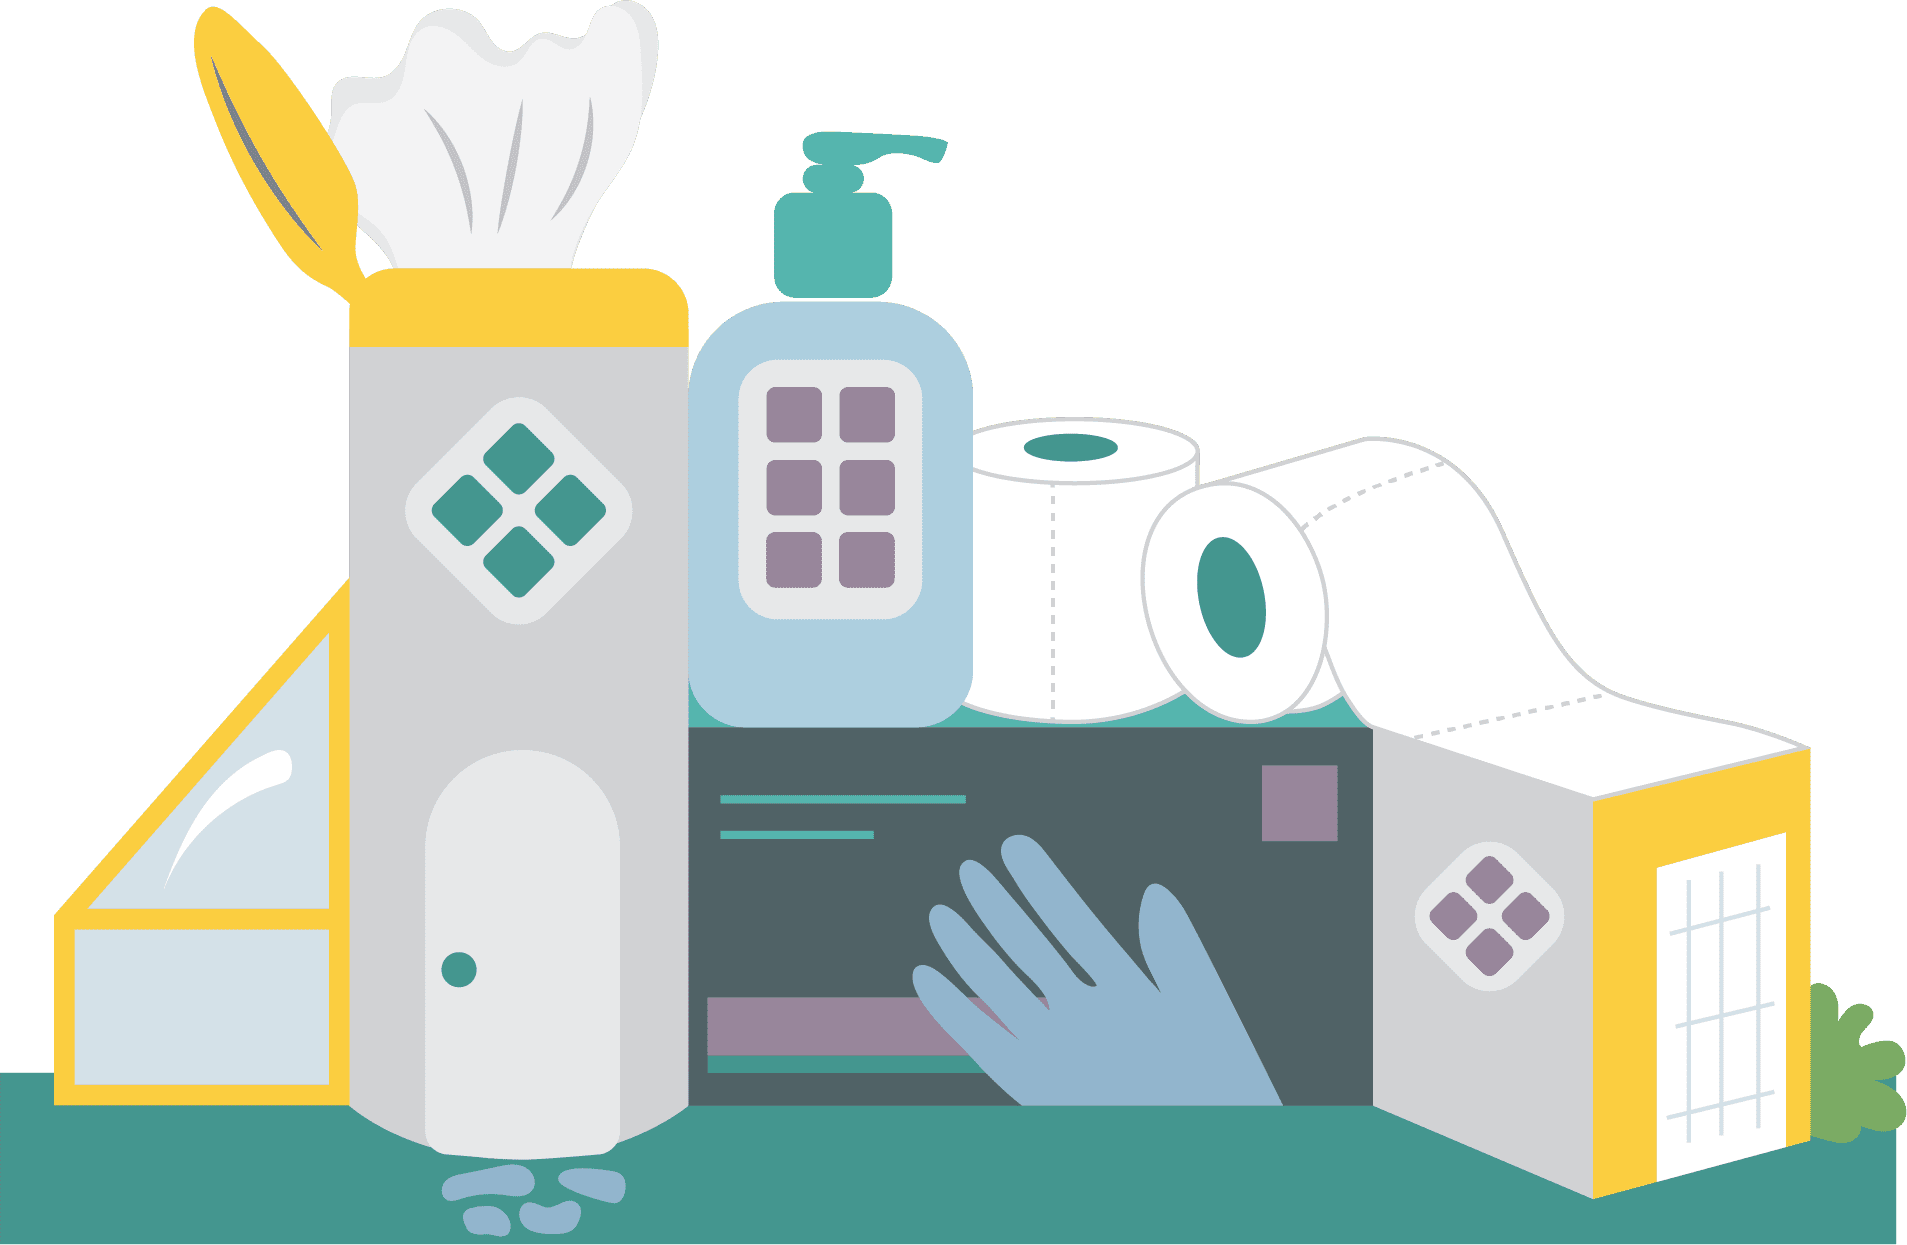 An illustration showing a house constructed of common household cleaning products like disenfecting wipes, gloves, hand sanitizer, and toilet paper